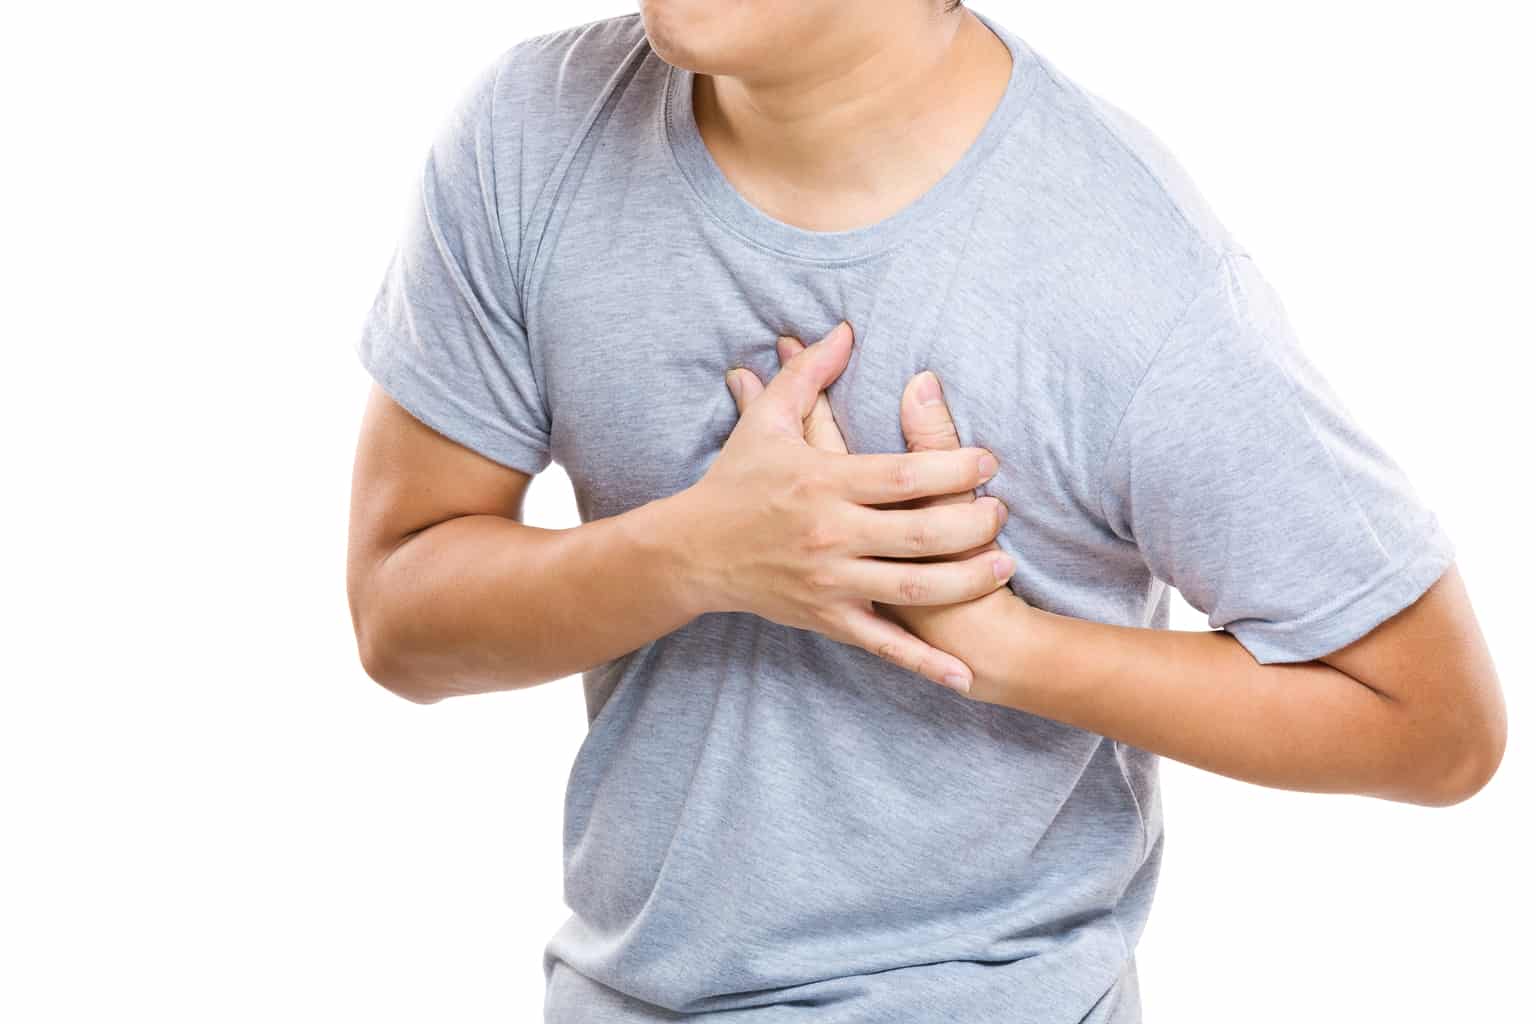 Penile signs that a heart attack is imminent